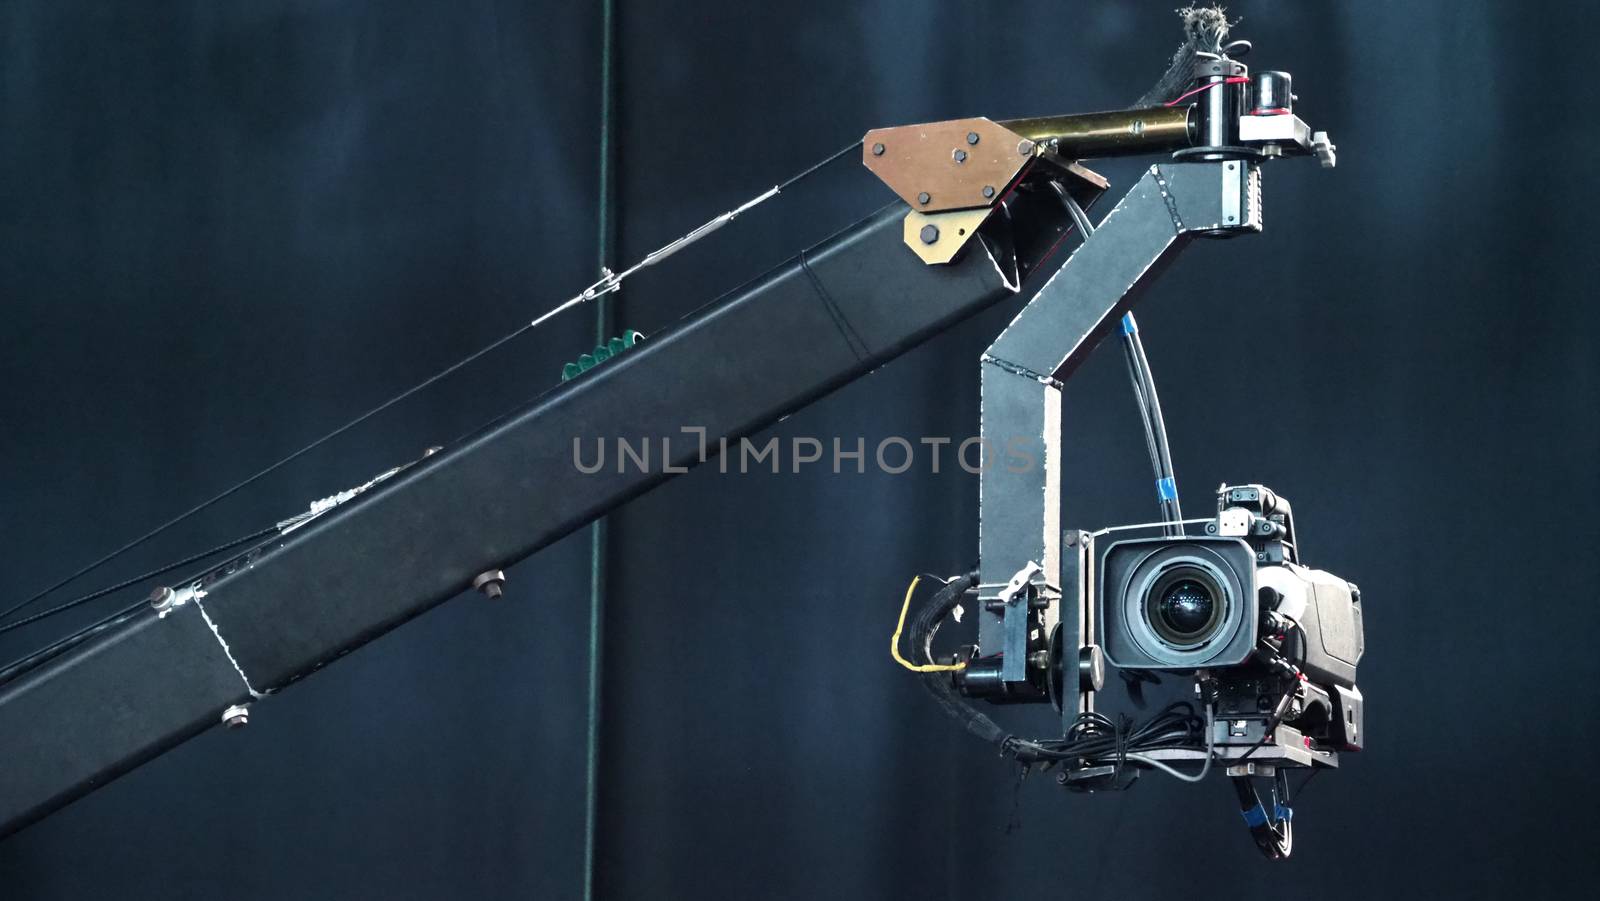 Blurry images of broadcast camera on the crane by gnepphoto